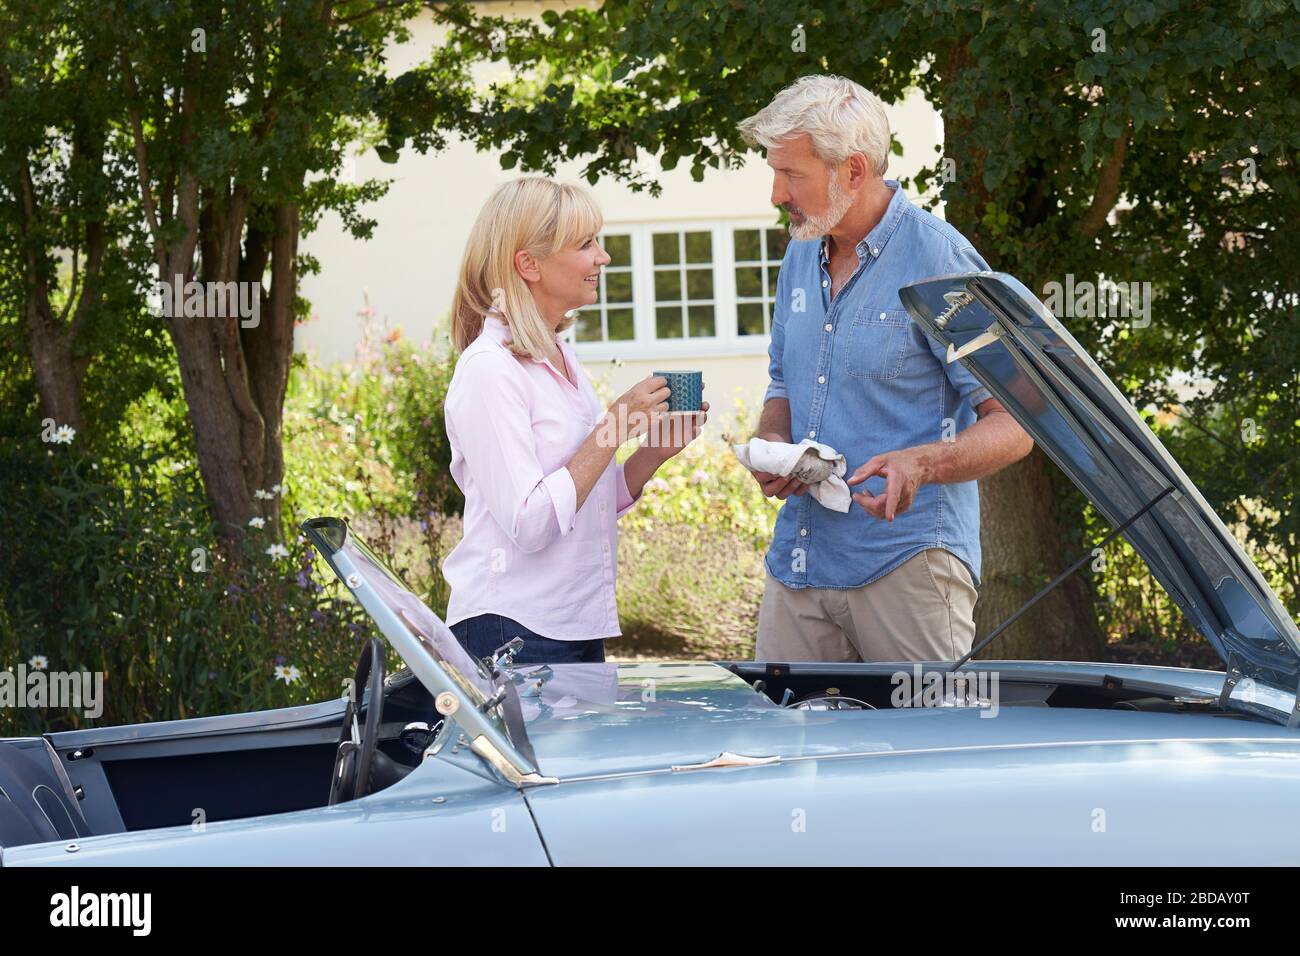 Mature Woman Bringing Hot Drink To Man Restoring Classic Sports Car Working On Engine Under Hood Stock Photo